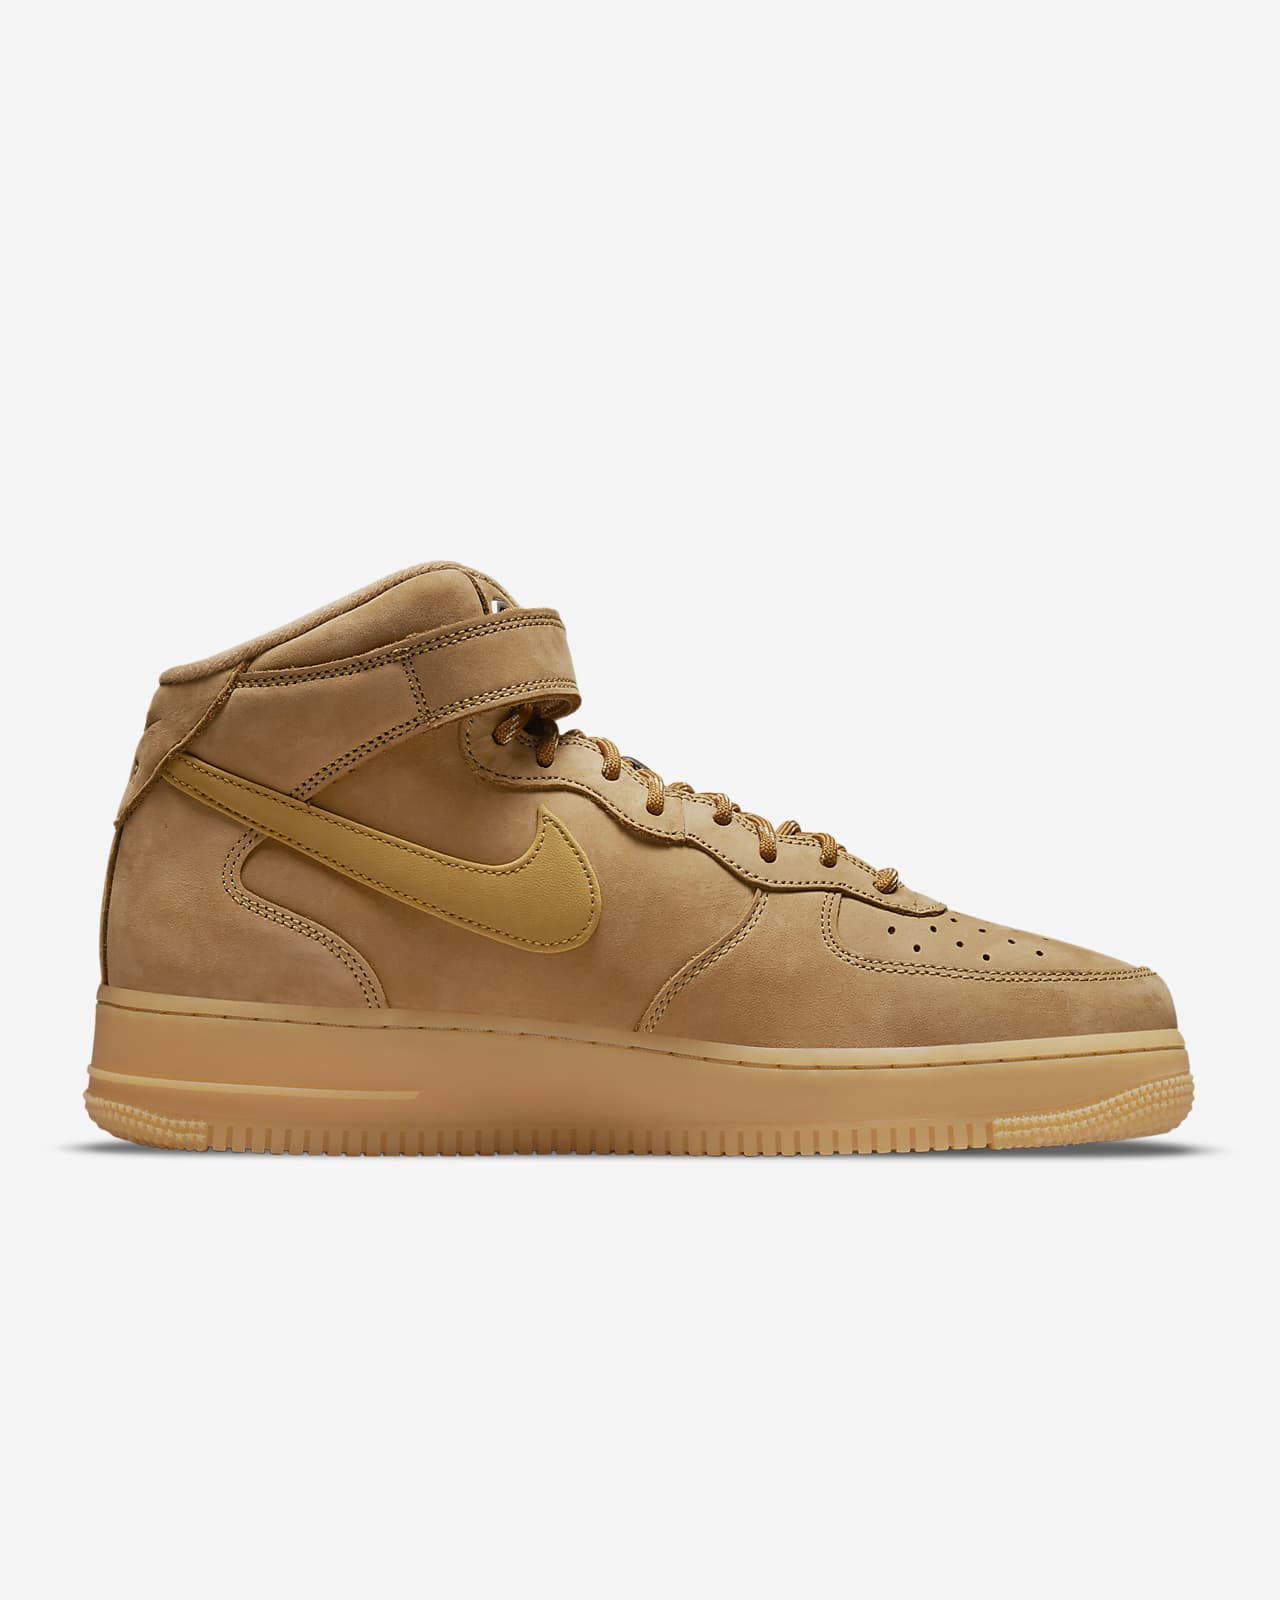 Nike Air Force 1 Mid '07 Men's Shoes.